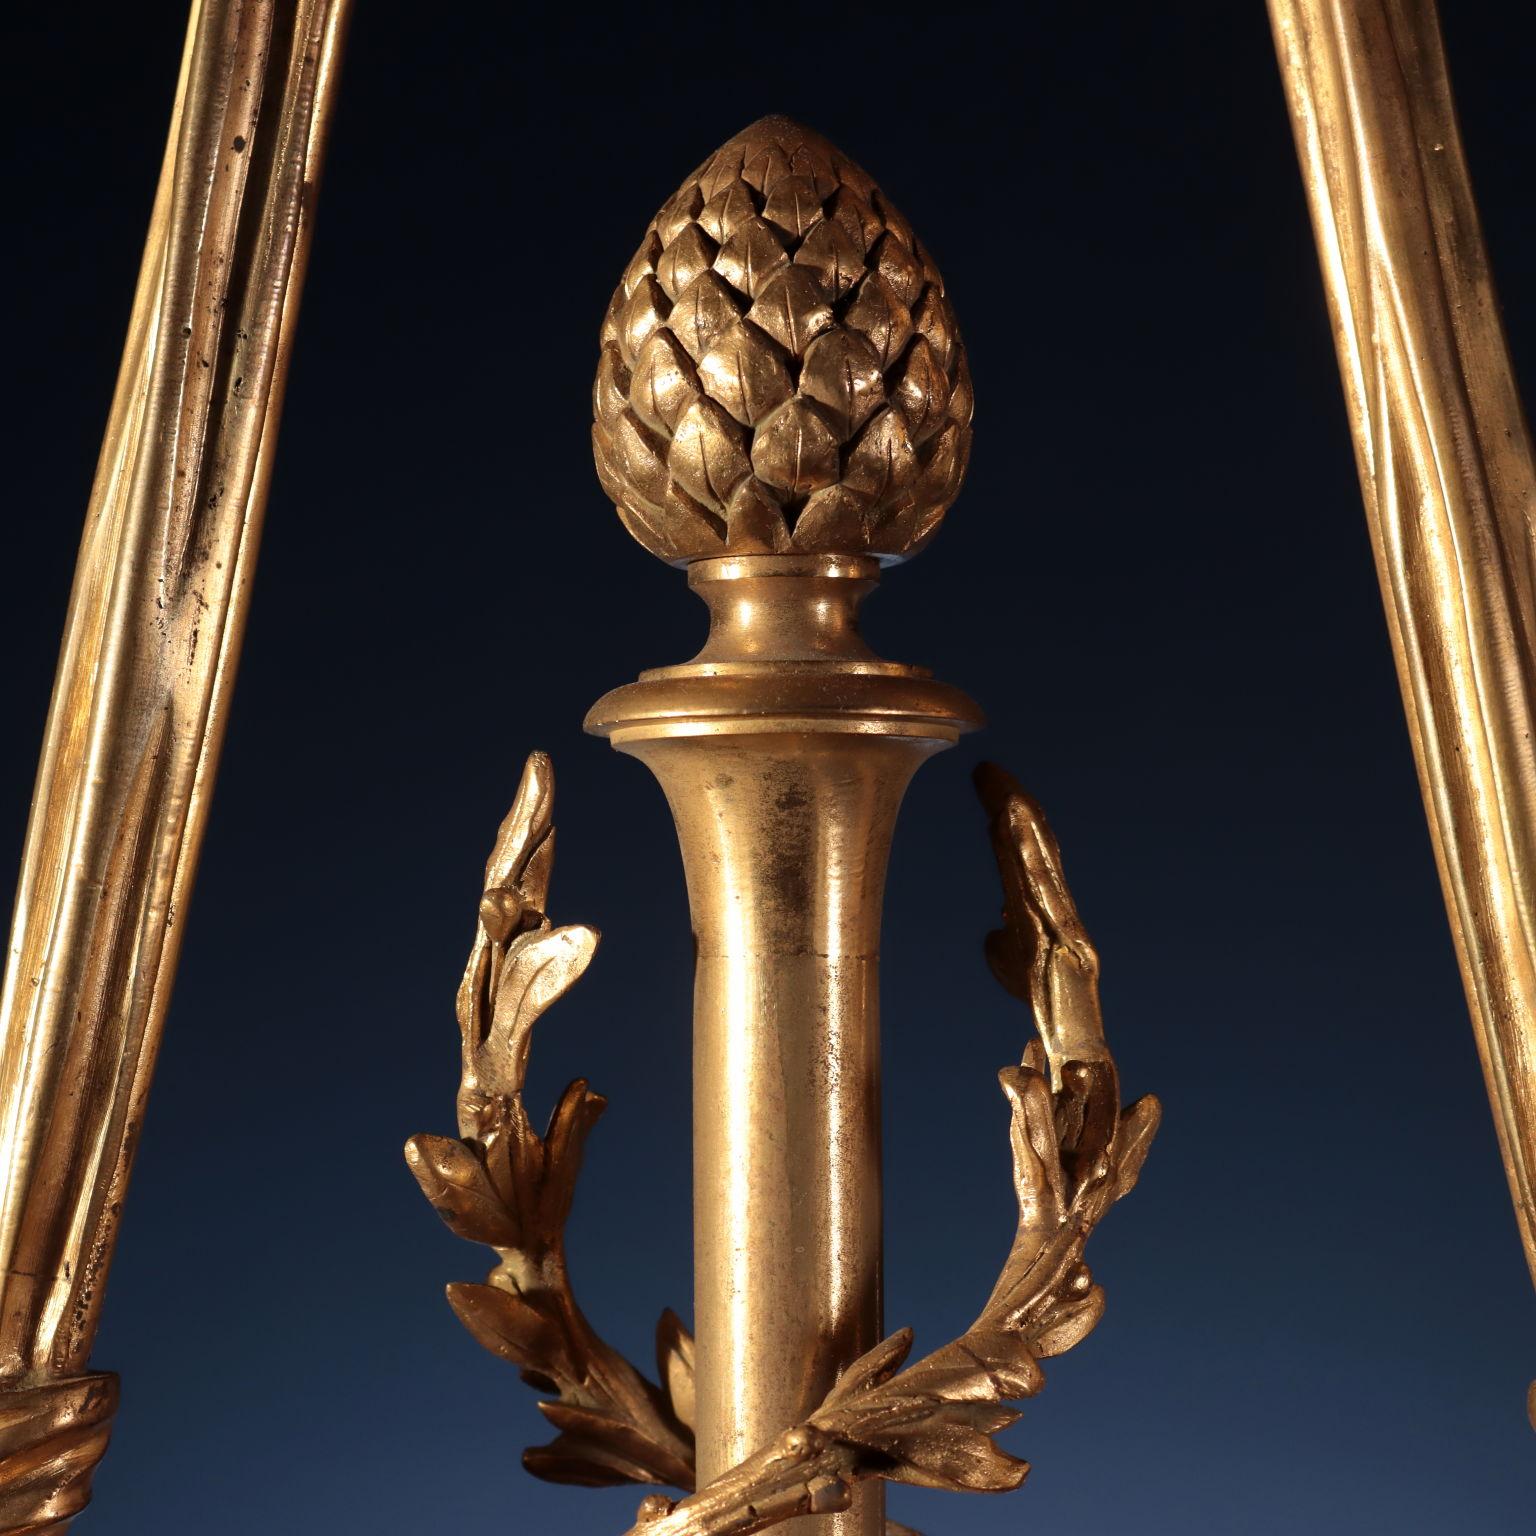 French Chandelier “O. Lelièvre Sclp”, “Susse Fres Edts” Gilded Bronze For Sale